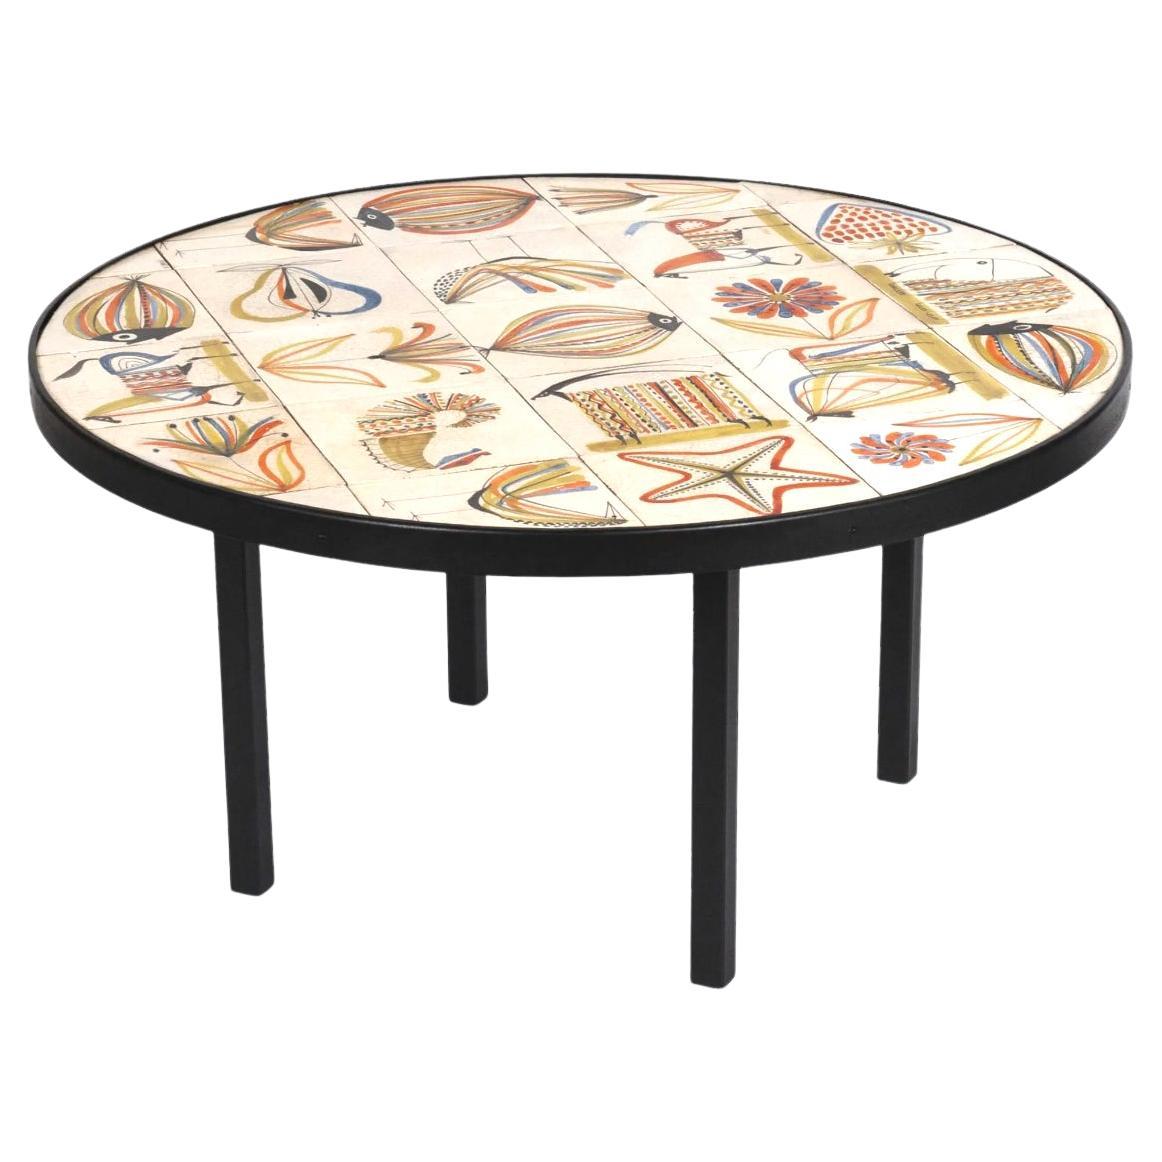 Rare ceramic table by Roger Capron, circa 1960, Vallauris, France.  For Sale